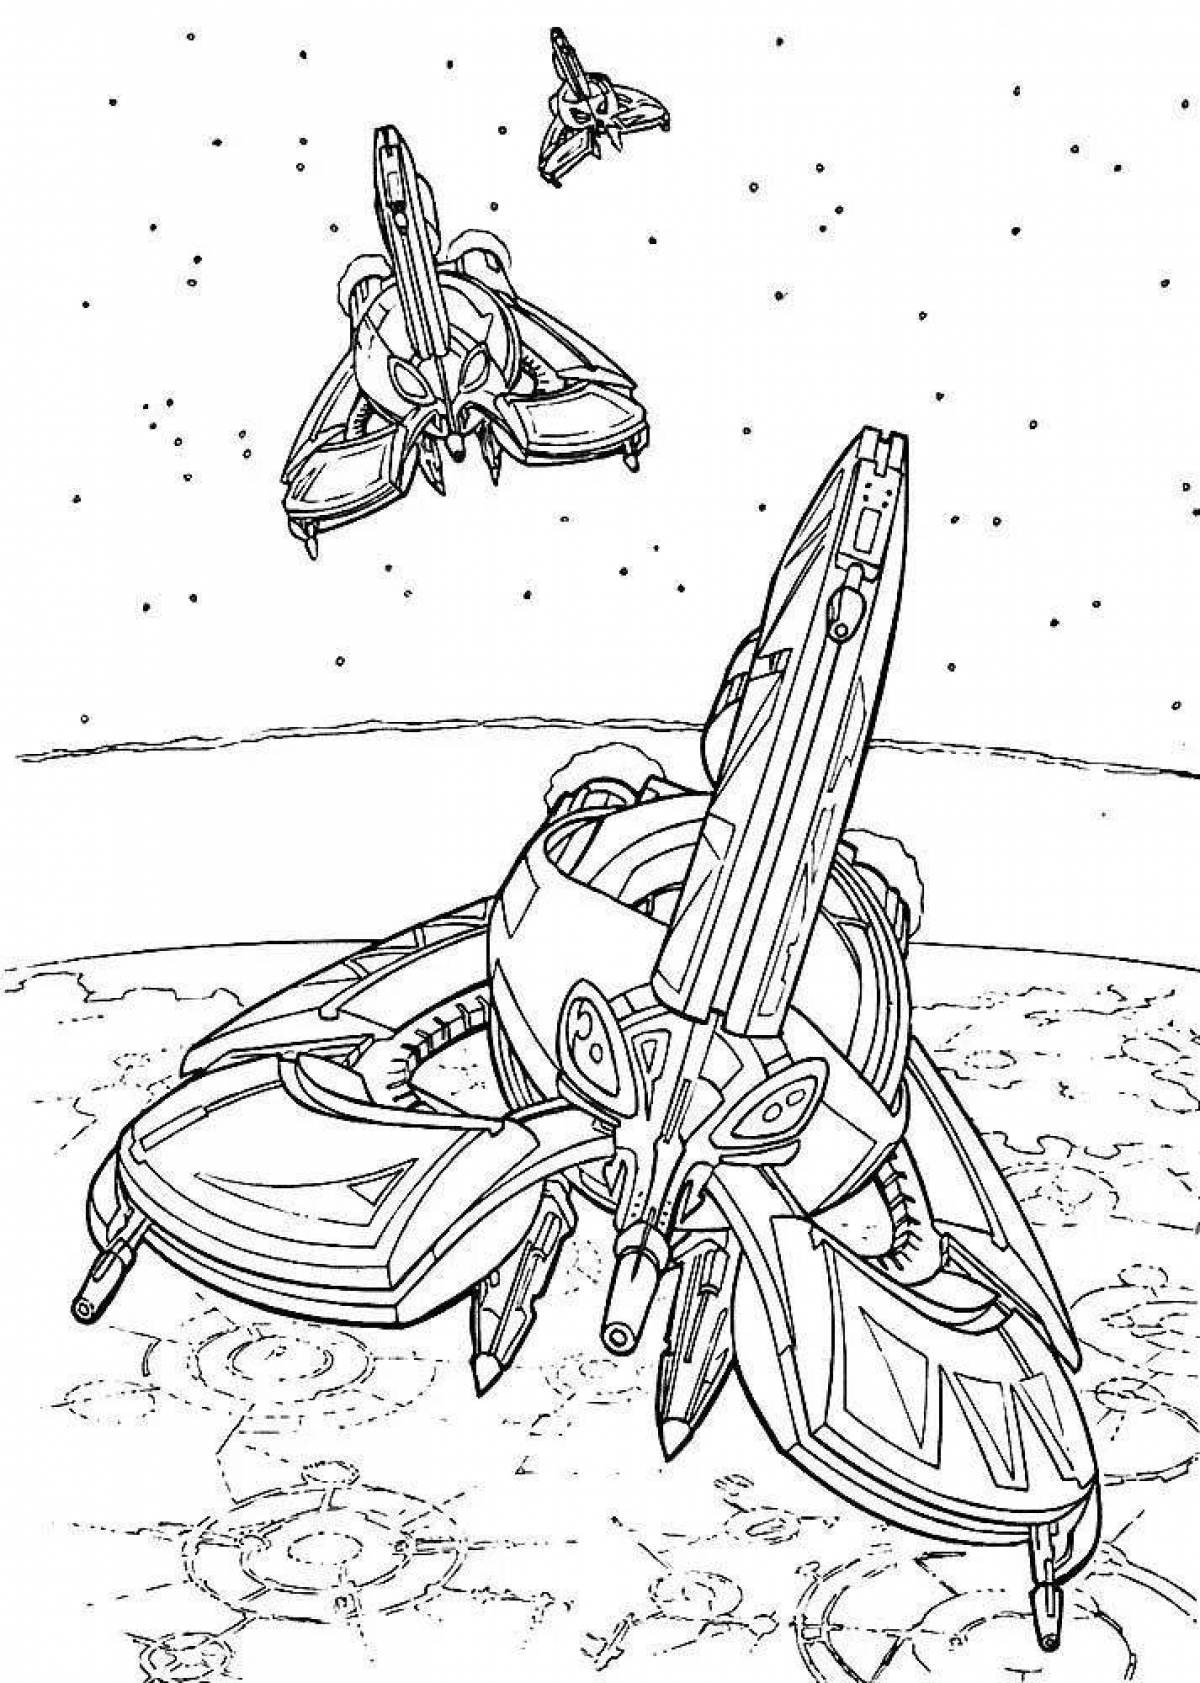 Exquisite spaceship coloring page